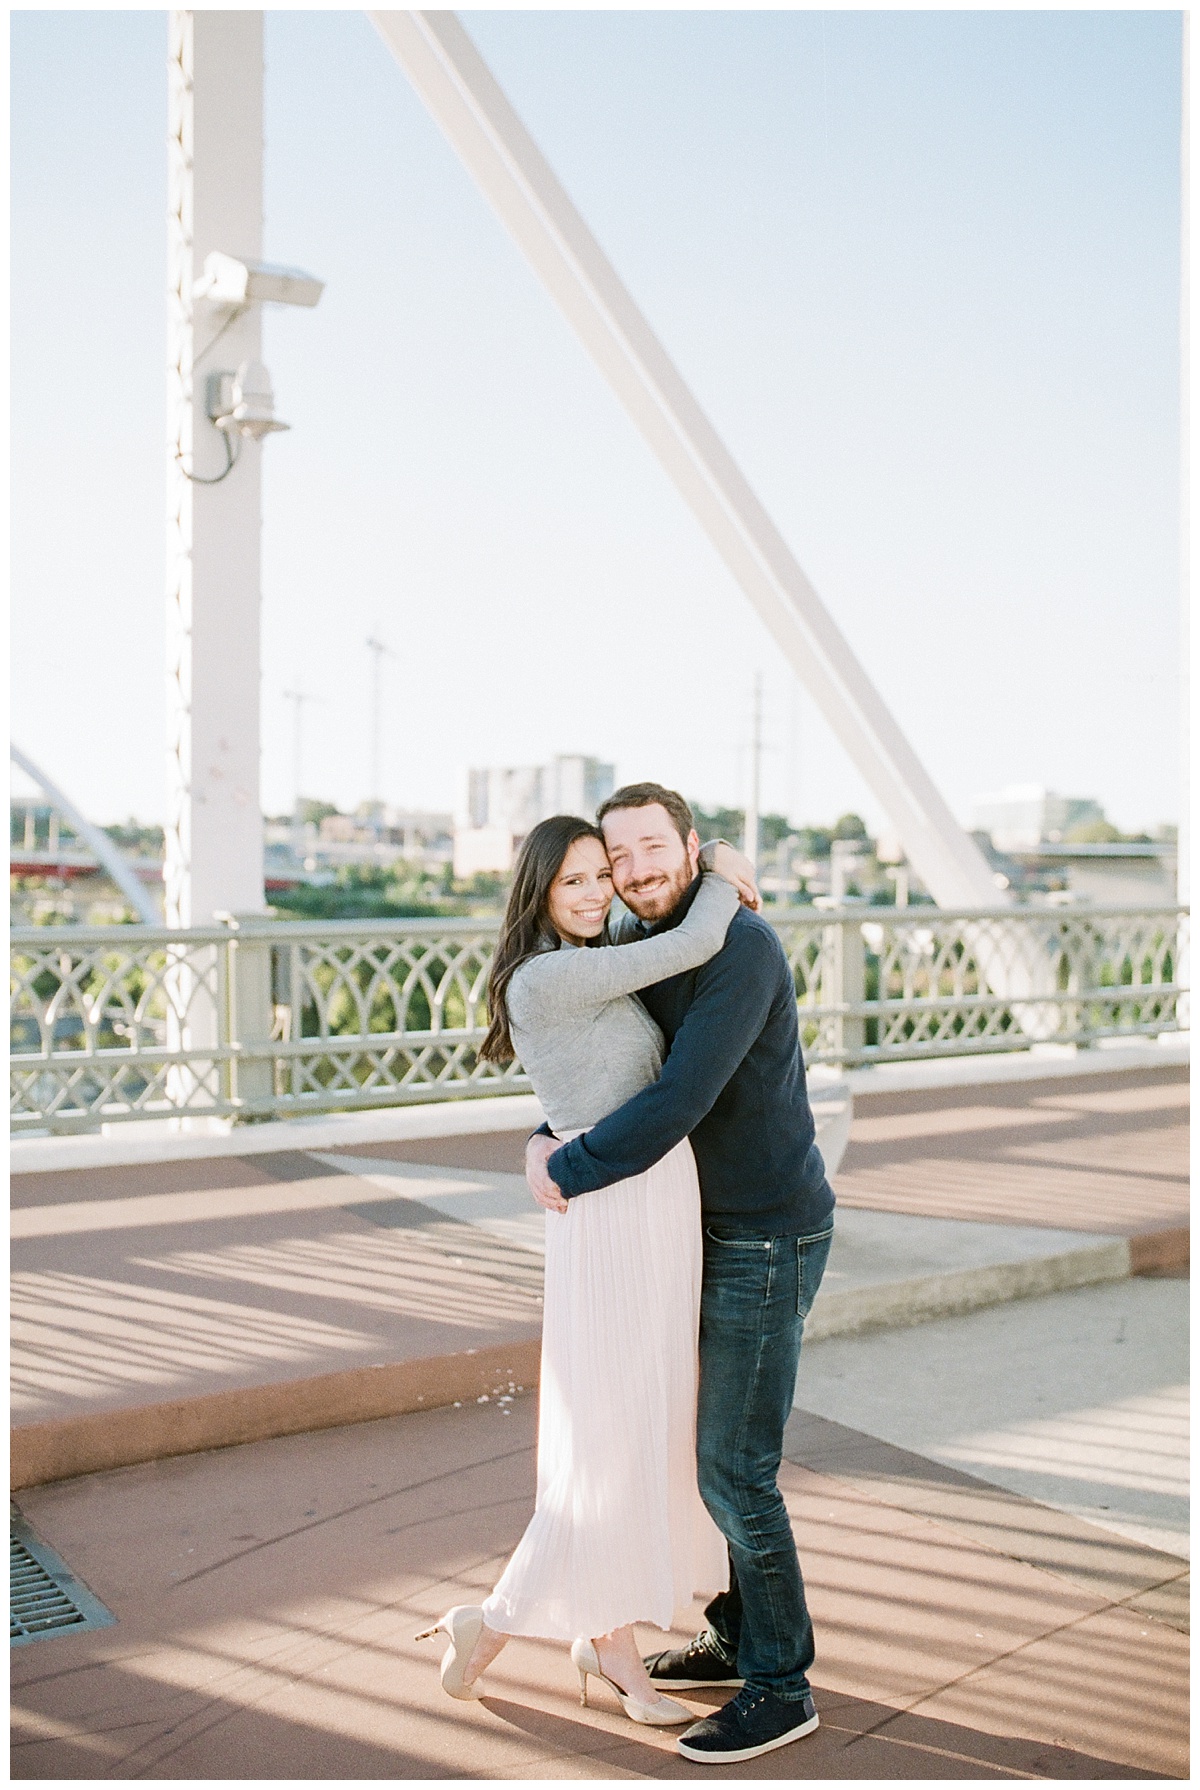 Couple enjoys their Downtown Nashville Maternity Session with Grace Paul Photography.